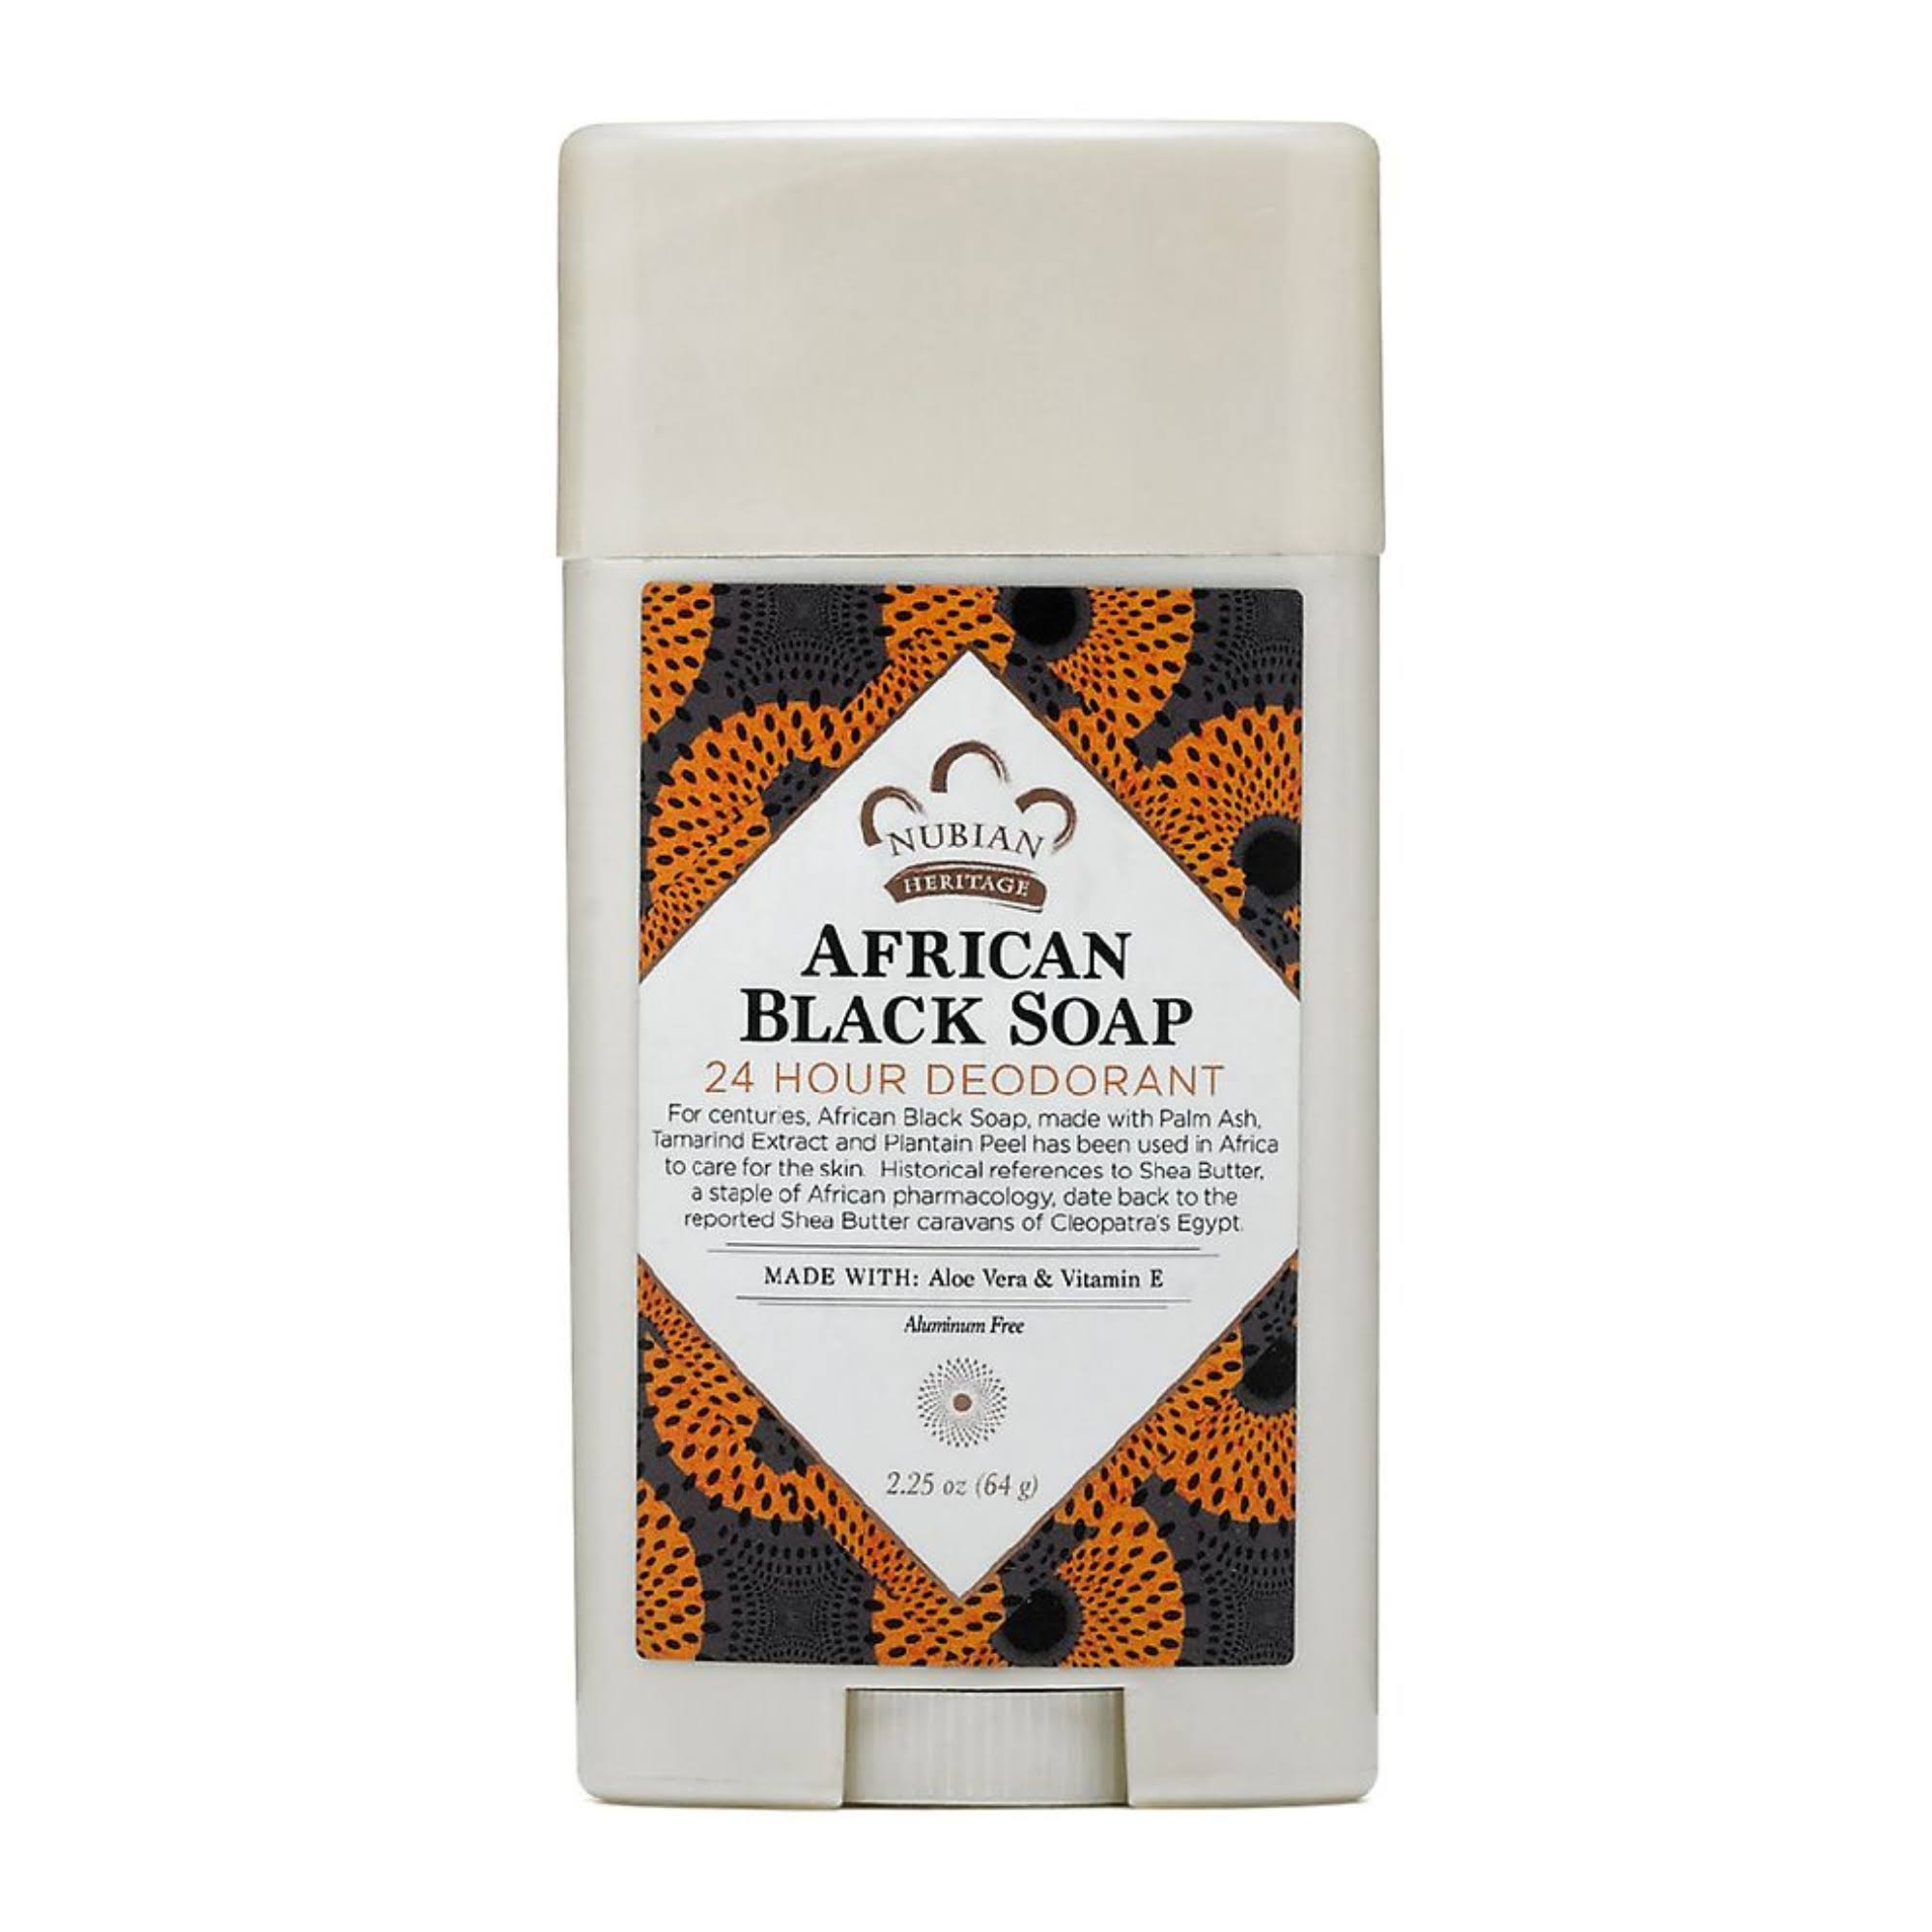 Nubian Heritage African Black Soap 24 Hour Deodorant - 2.25oz, with Aloe and Vitamin E